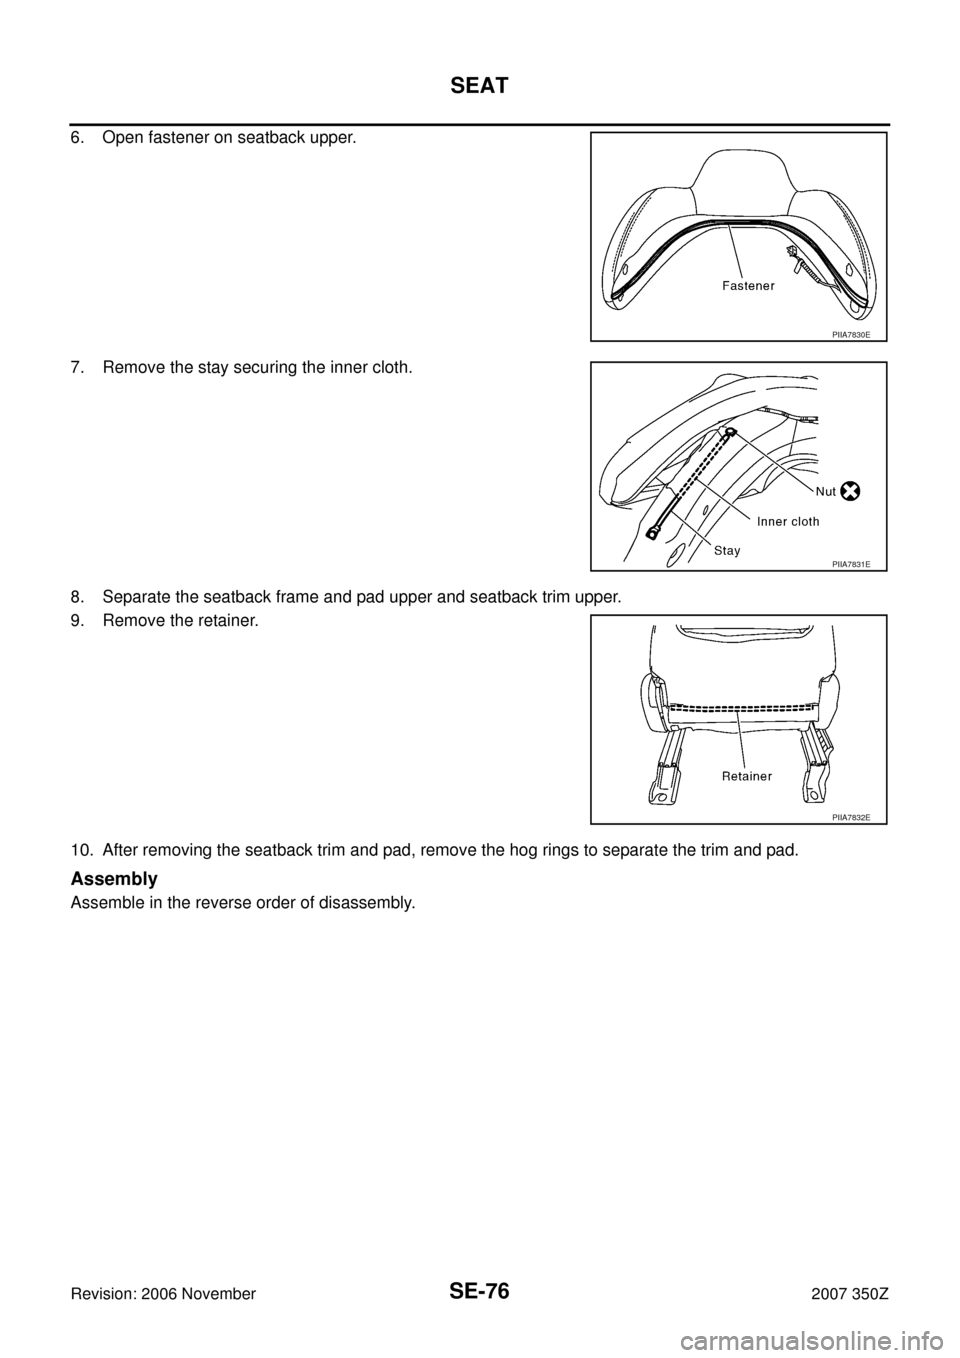 NISSAN 350Z 2007 Z33 Seat Manual PDF SE-76
SEAT
Revision: 2006 November2007 350Z
6. Open fastener on seatback upper.
7. Remove the stay securing the inner cloth.
8. Separate the seatback frame and pad upper and seatback trim upper.
9. Re